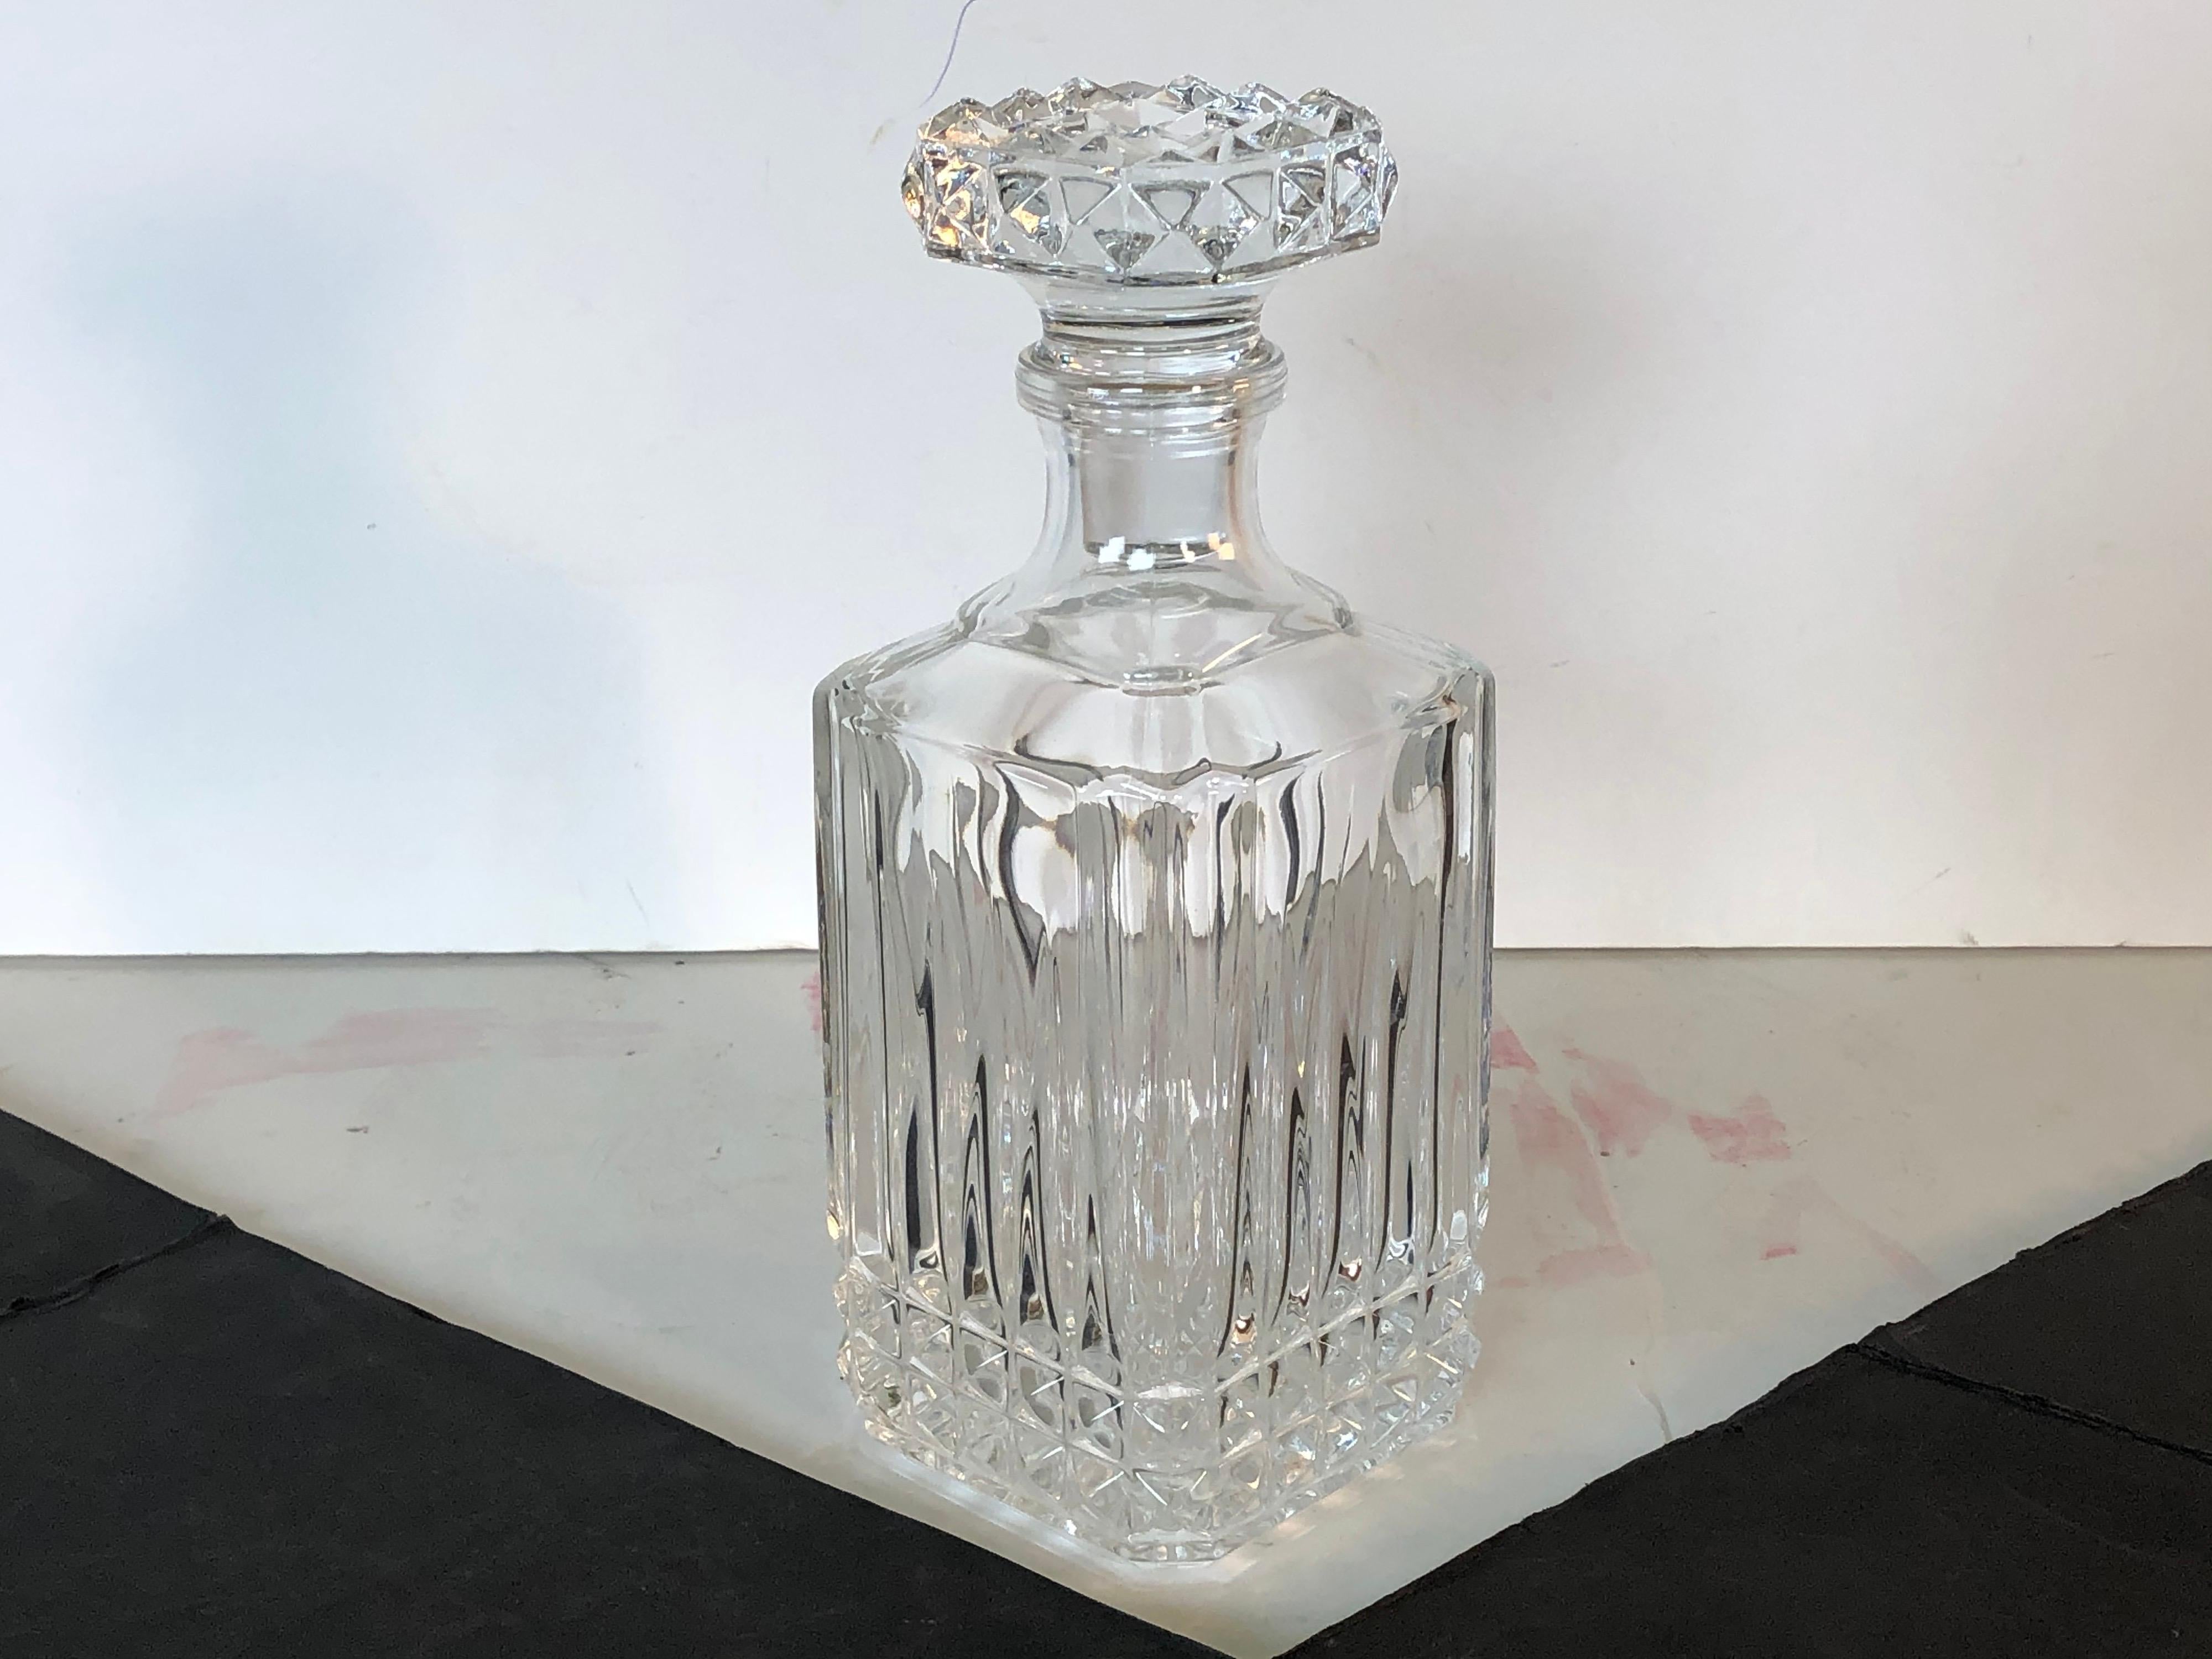 Vintage 1960s square glass diamond point decanter with solid glass stopper. Excellent condition. No marks.